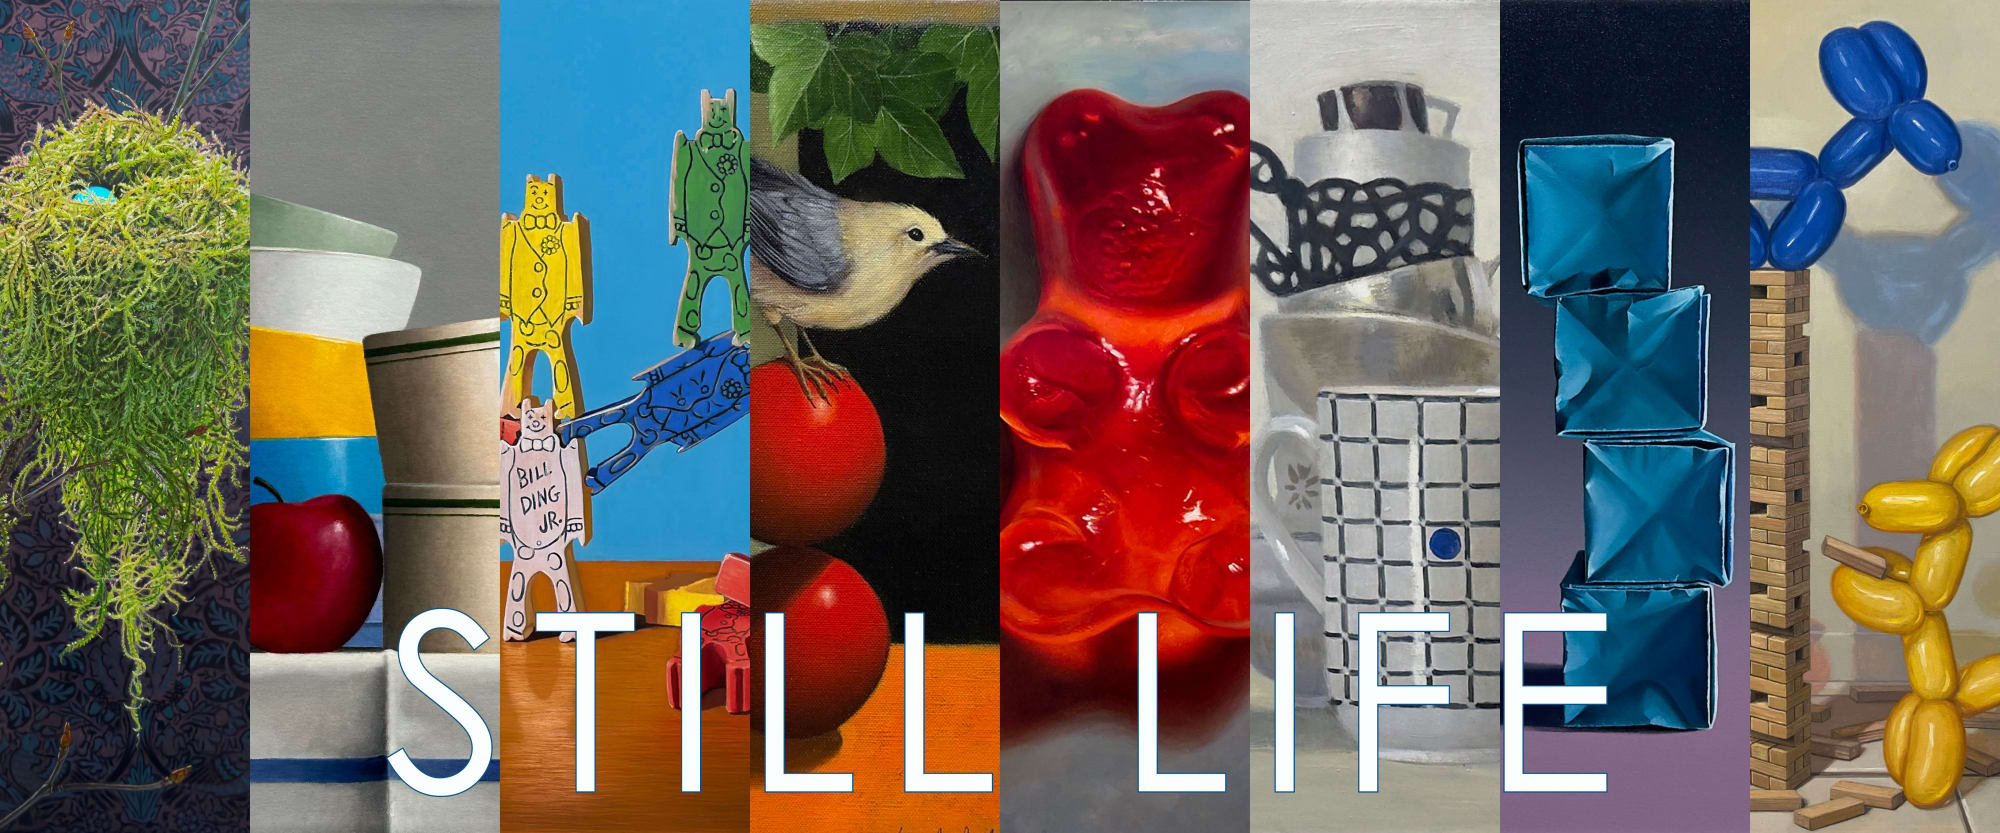 Still Life Introductory Image